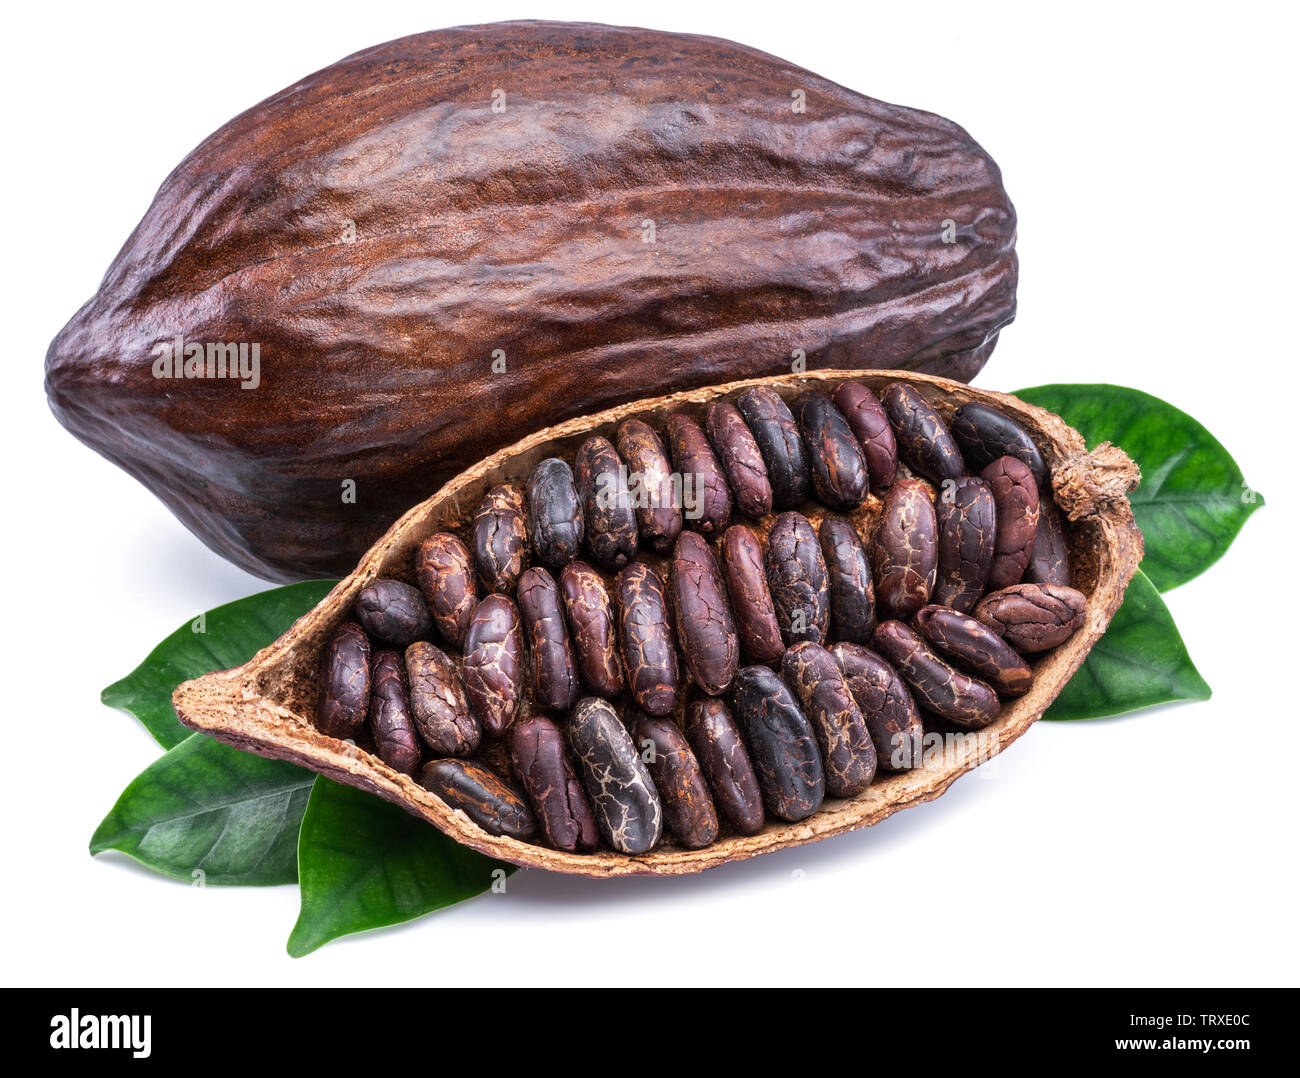 Cocoa pods and cocoa beans - chocolate basis isolated on a white background. Stock Photo